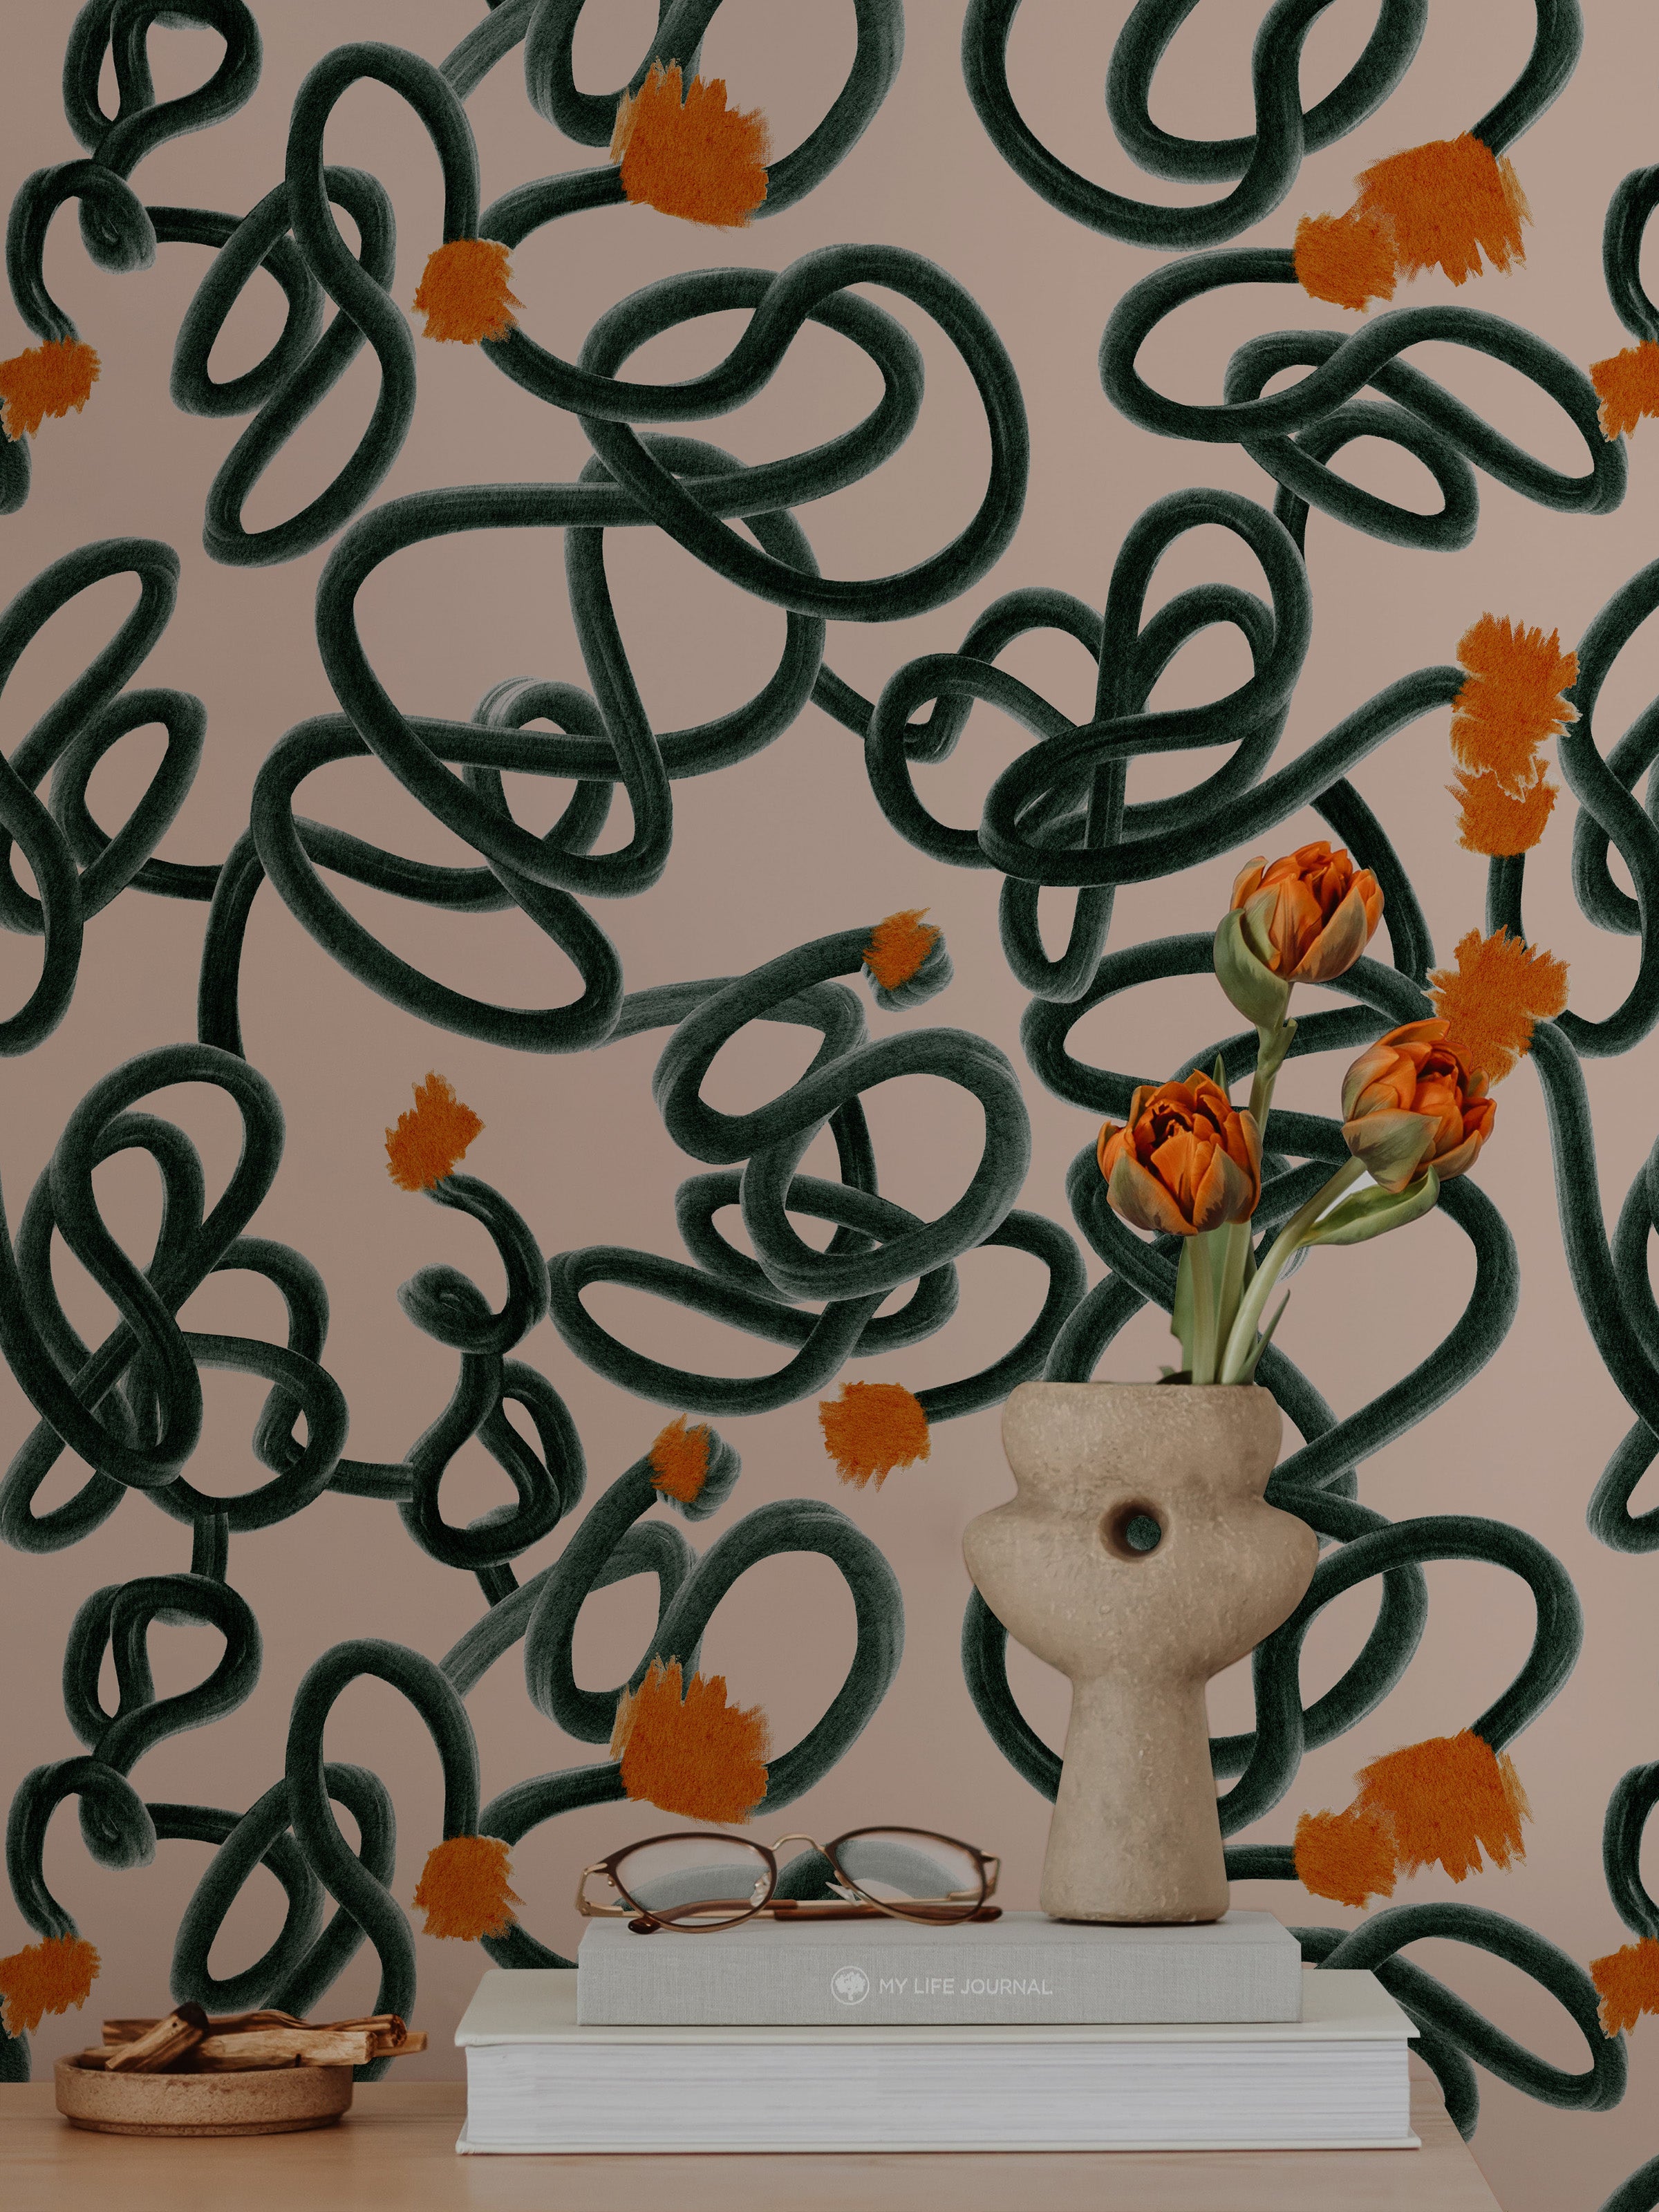 An artistic workspace enhanced by the Abstract Scribble Wallpaper, displaying a unique pattern of tangled green scribbles and orange floral accents on a peach backdrop. The room includes a white chair, a decorative vase with vibrant tulips, and books, creating an inspiring and creative environment.